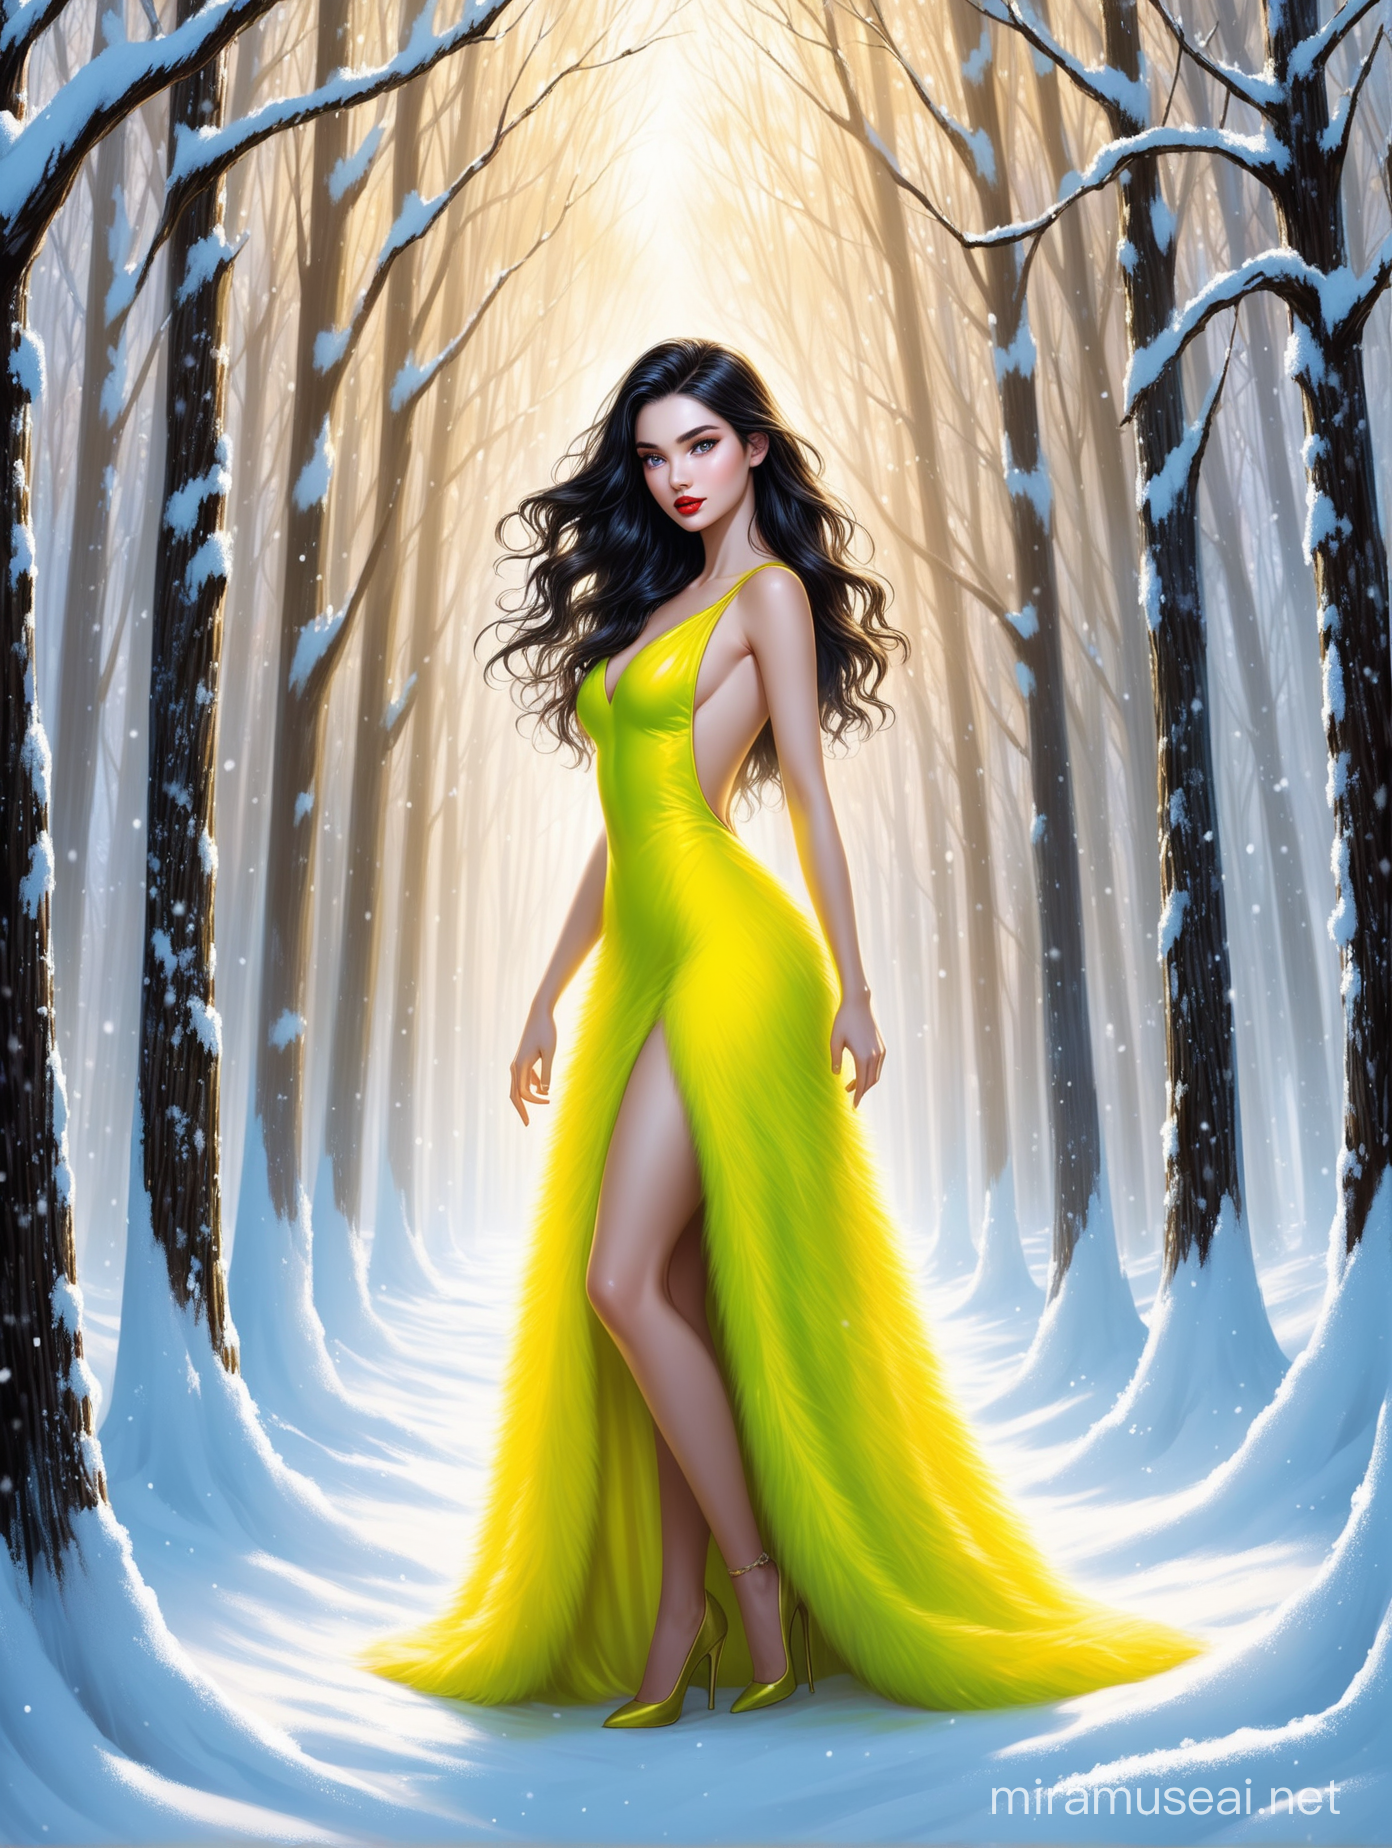 Beautiful Young Woman in Elegant Yellow Dress Amidst Snowy Forest